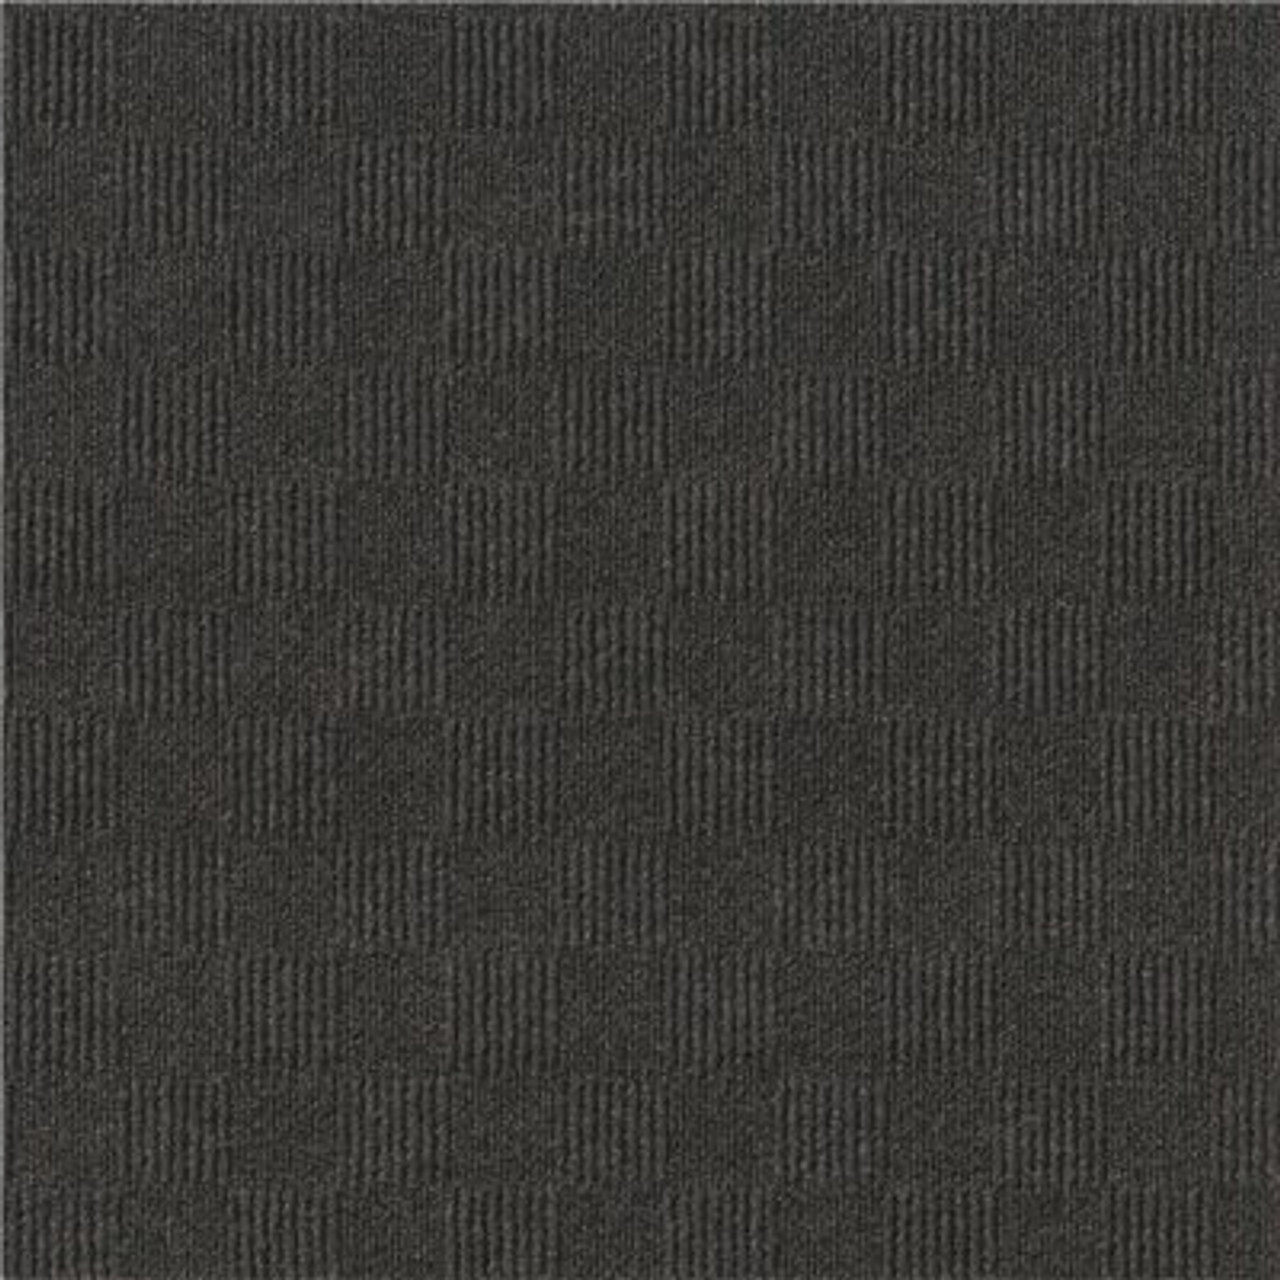 Foss First Impressions City Block Blk Ice 24 In. X 24 In. Commercial Peel And Stick Carpet Tile (15-Tile / Case)